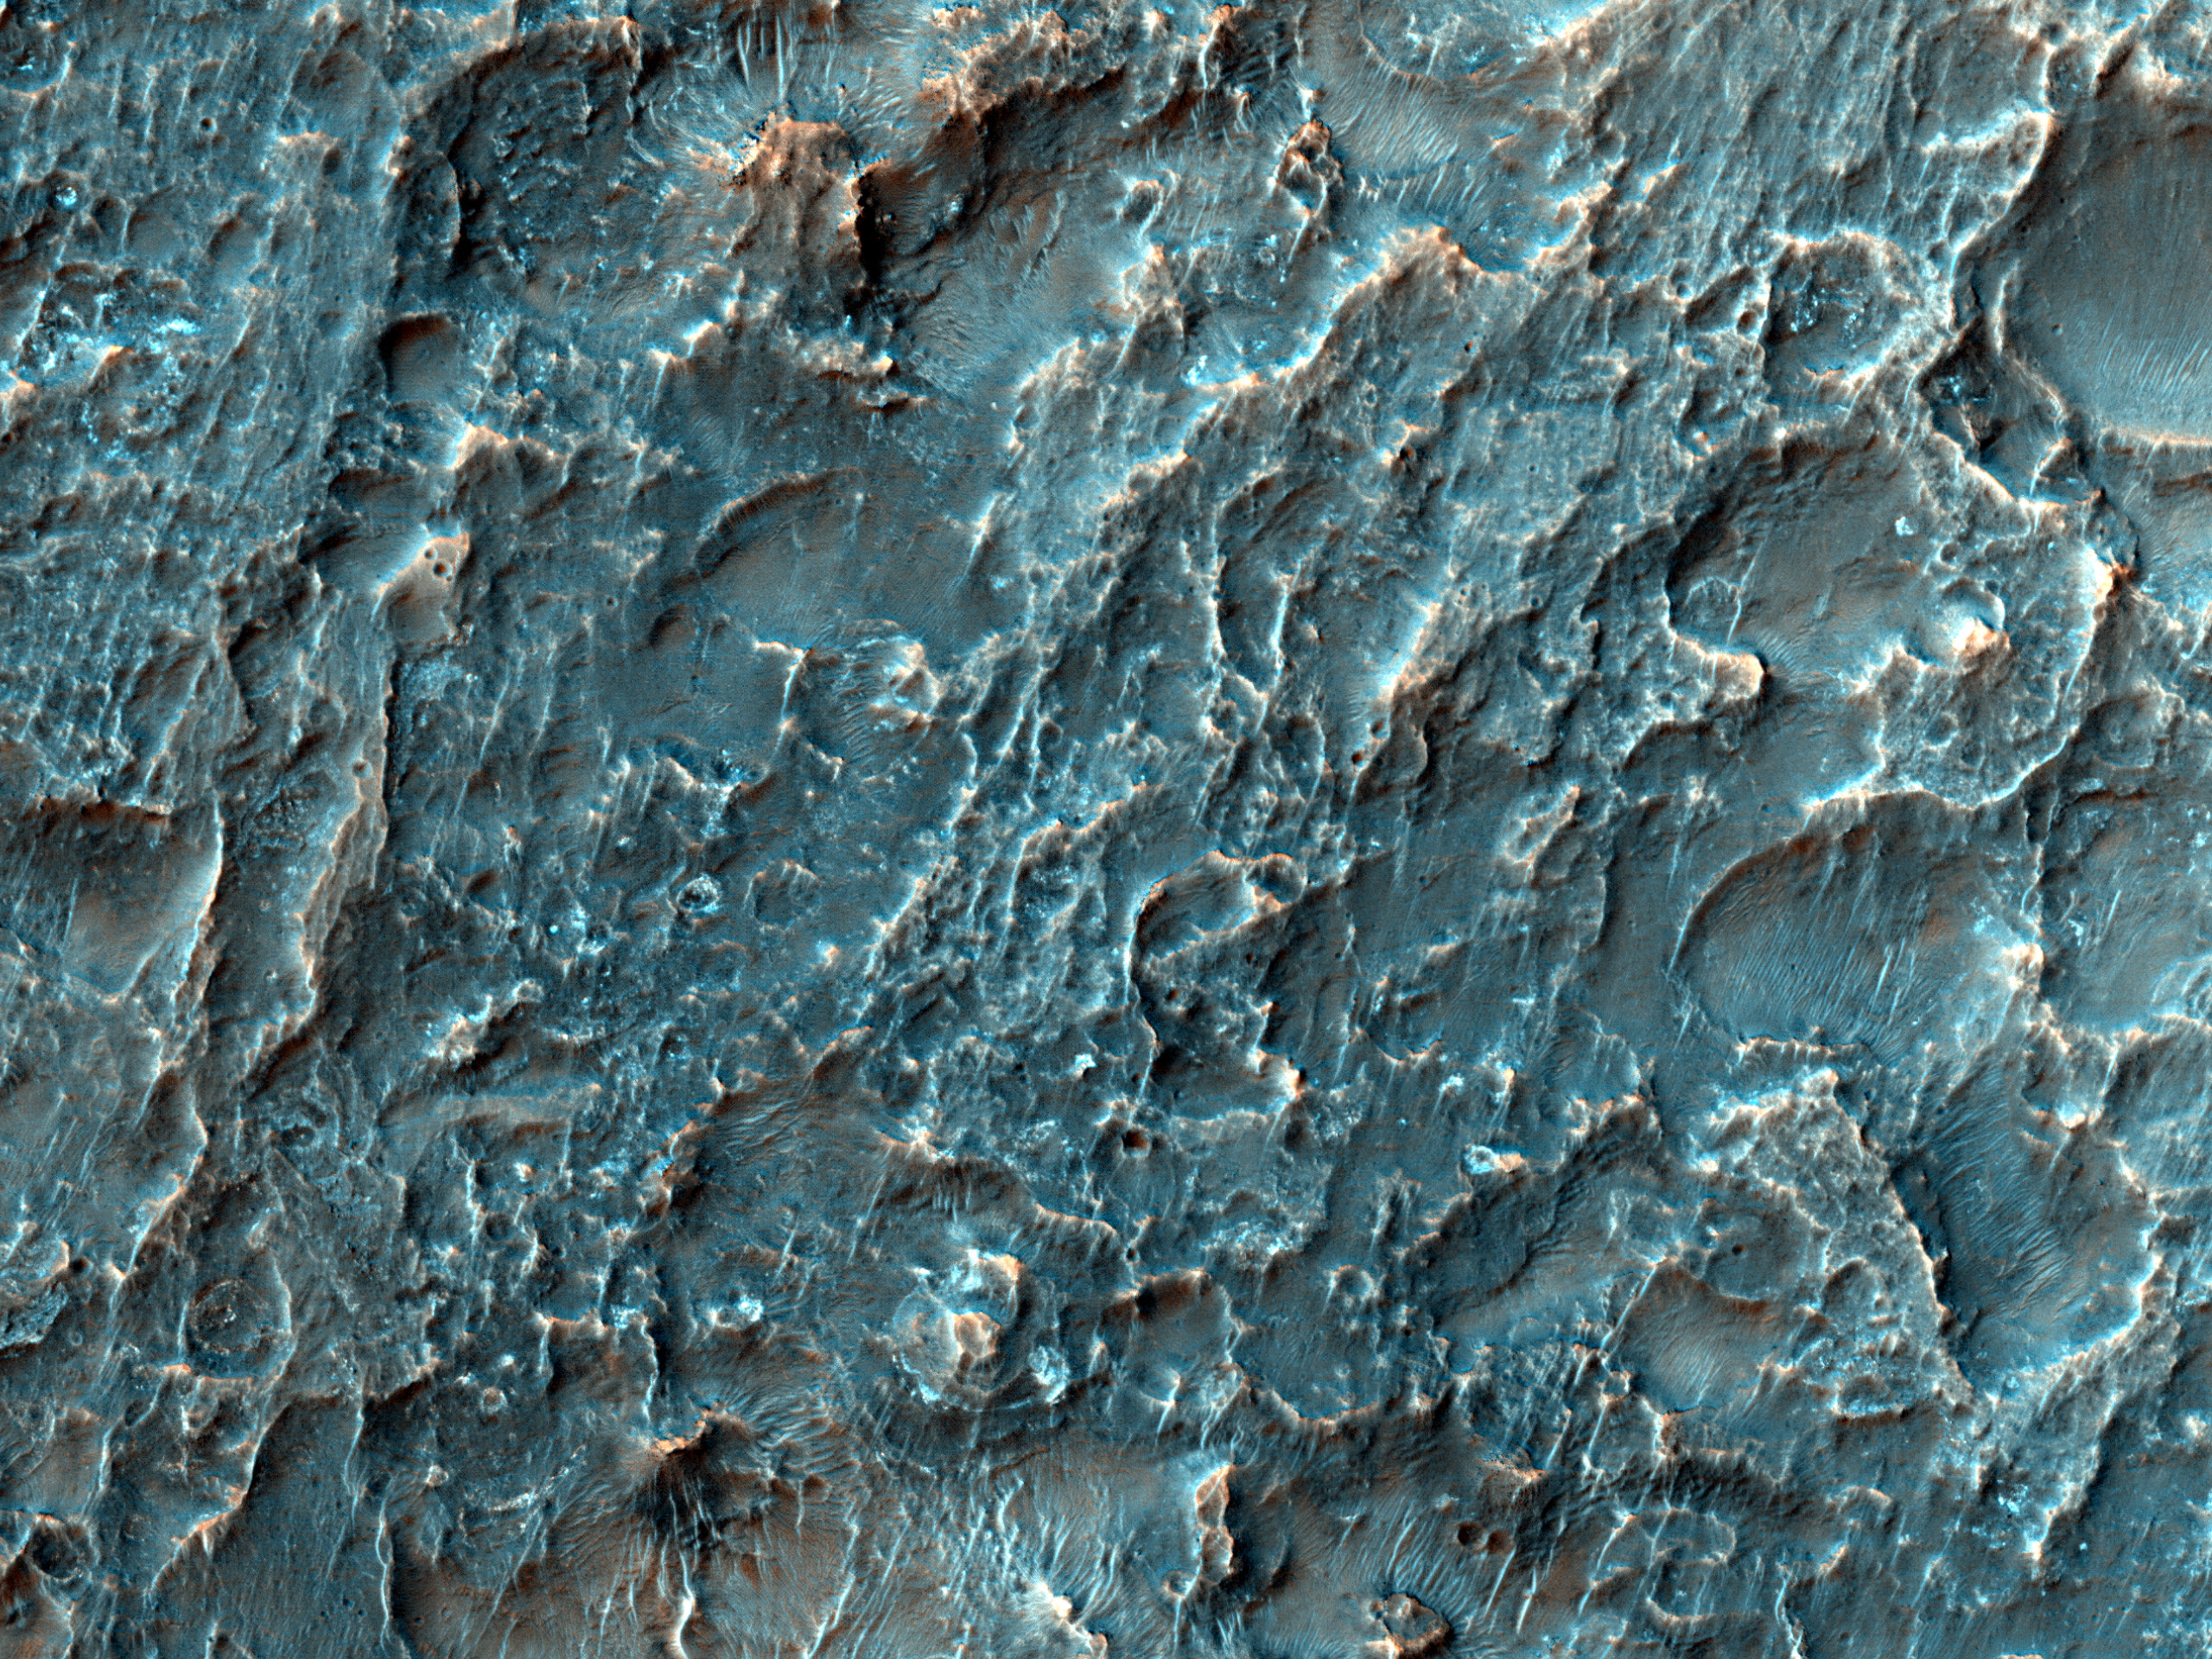 Small Sinuous Ridges and Butte-Forming Material